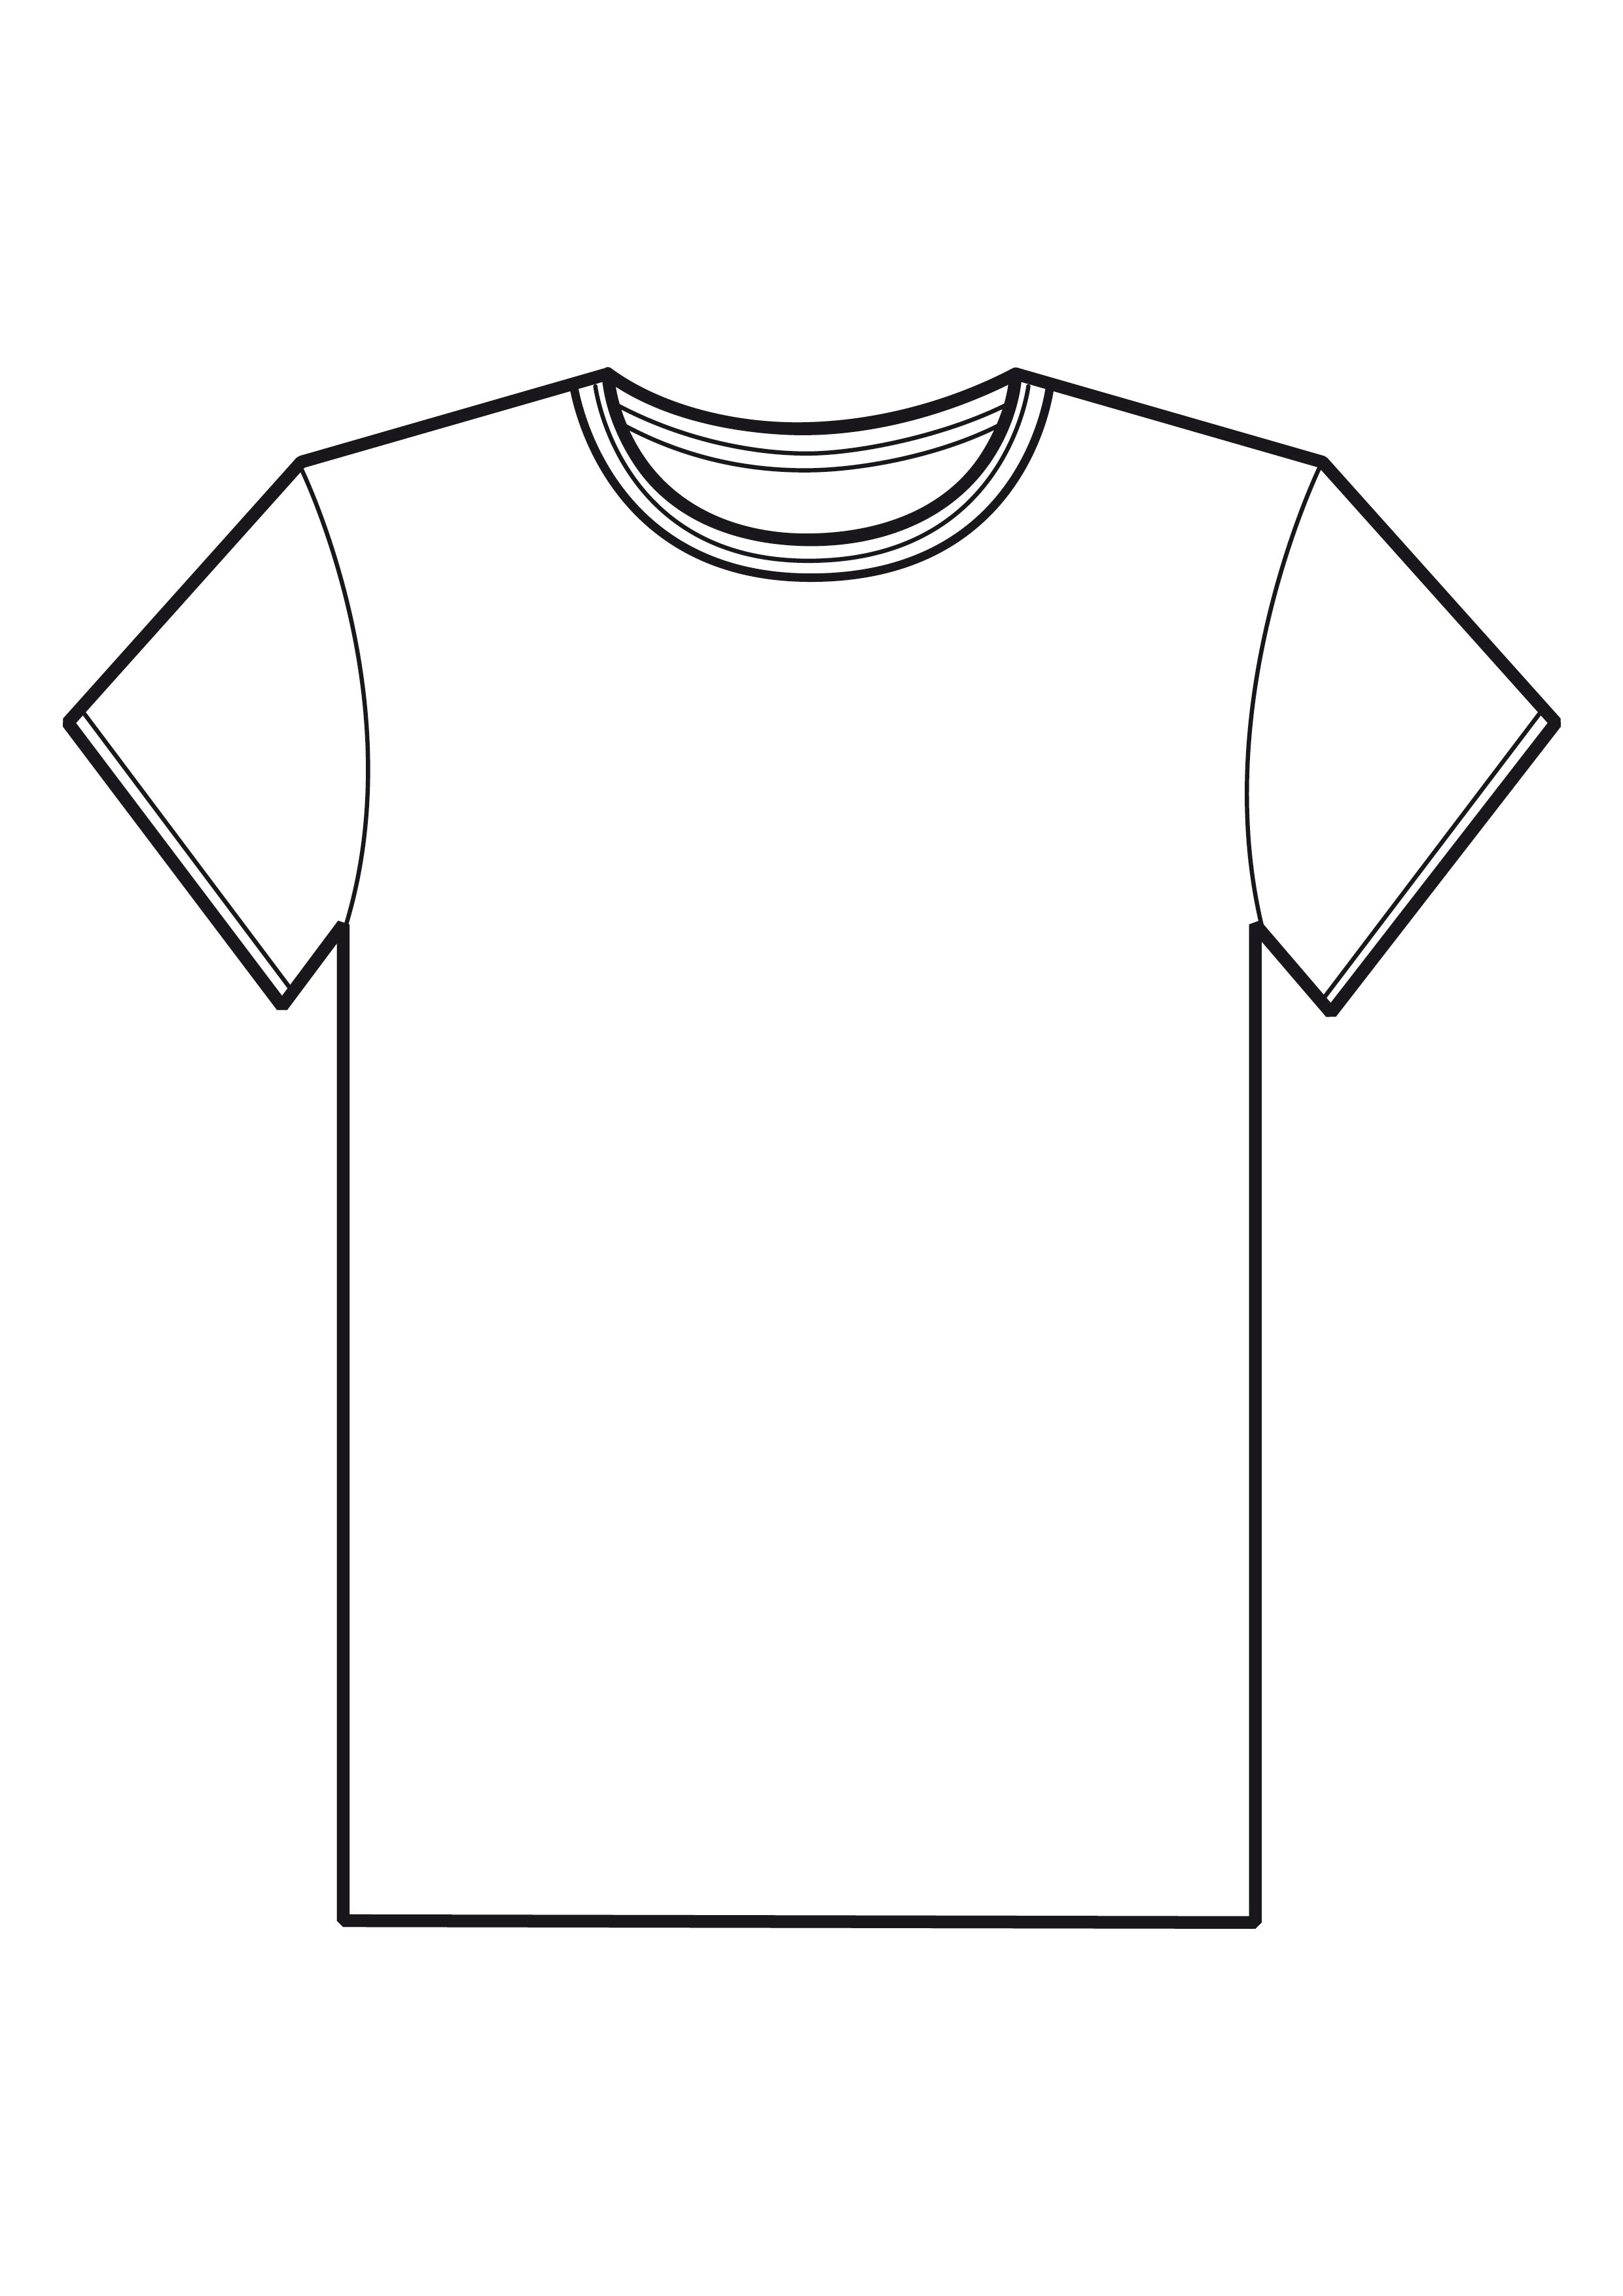 19 Blank T Shirt Clip Art Free Cliparts That You Can Download To You